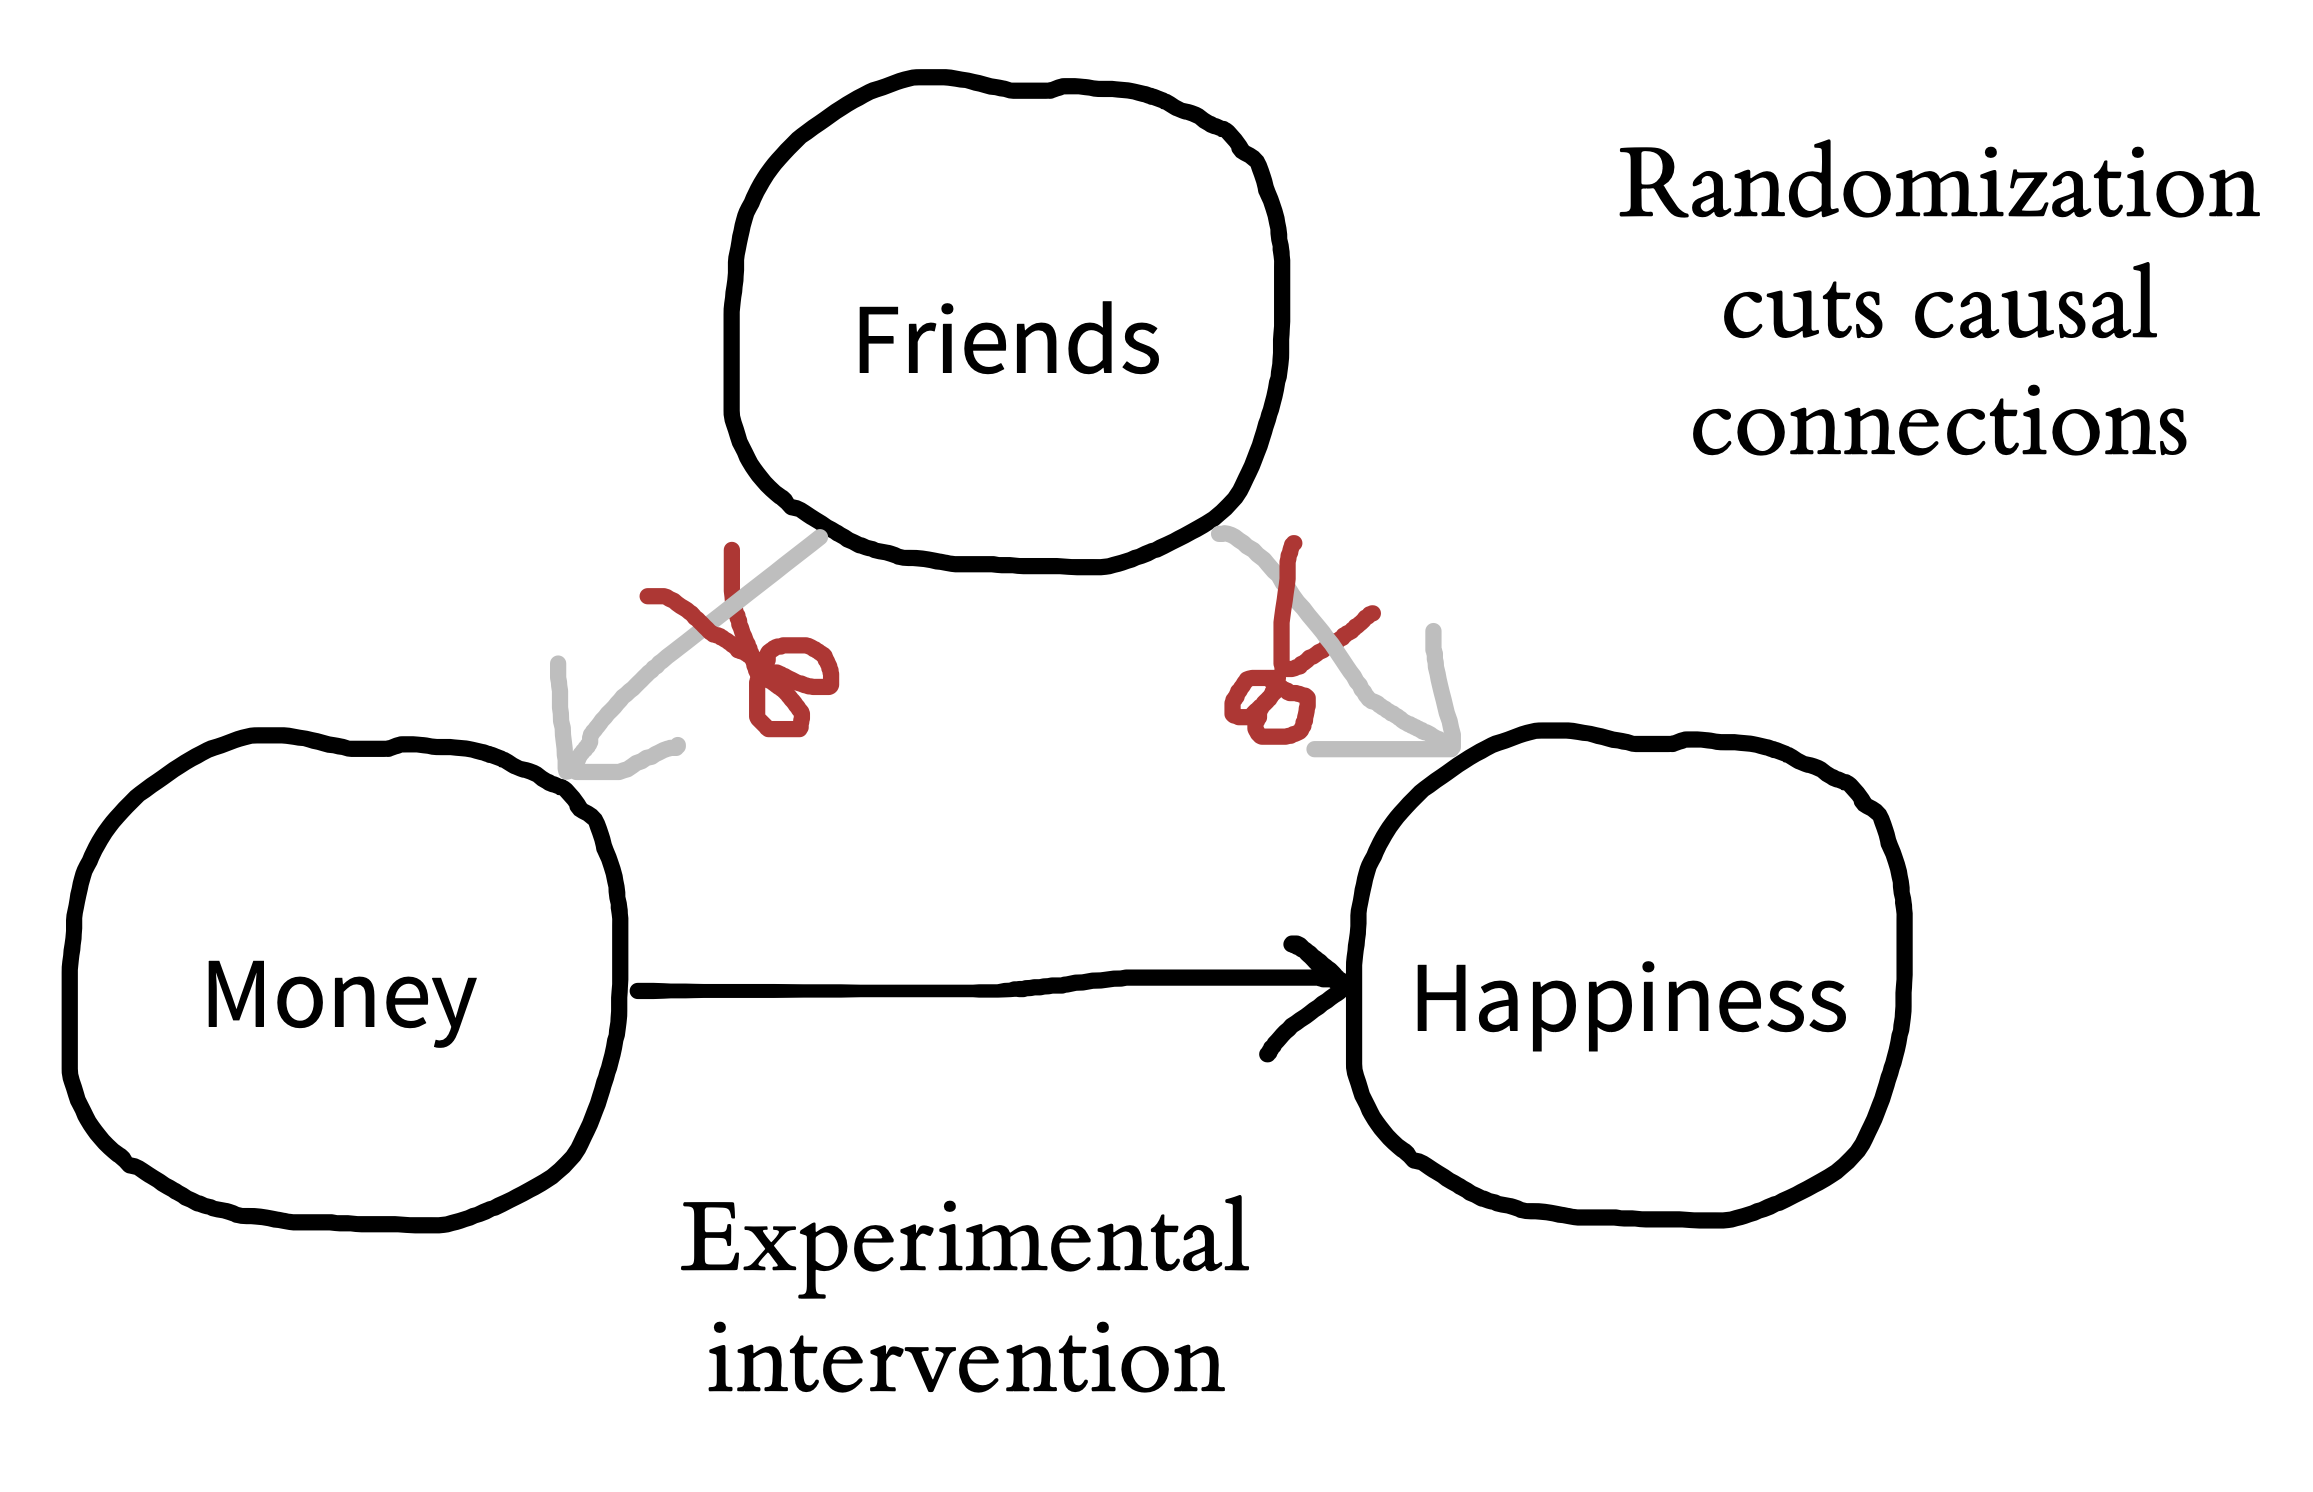 In principle, experiments allows us to "snip away" the friend confound by holding it constant (though in practice, it can be tough to figure out how to hold something constant when you are talking about people as your unit of study).